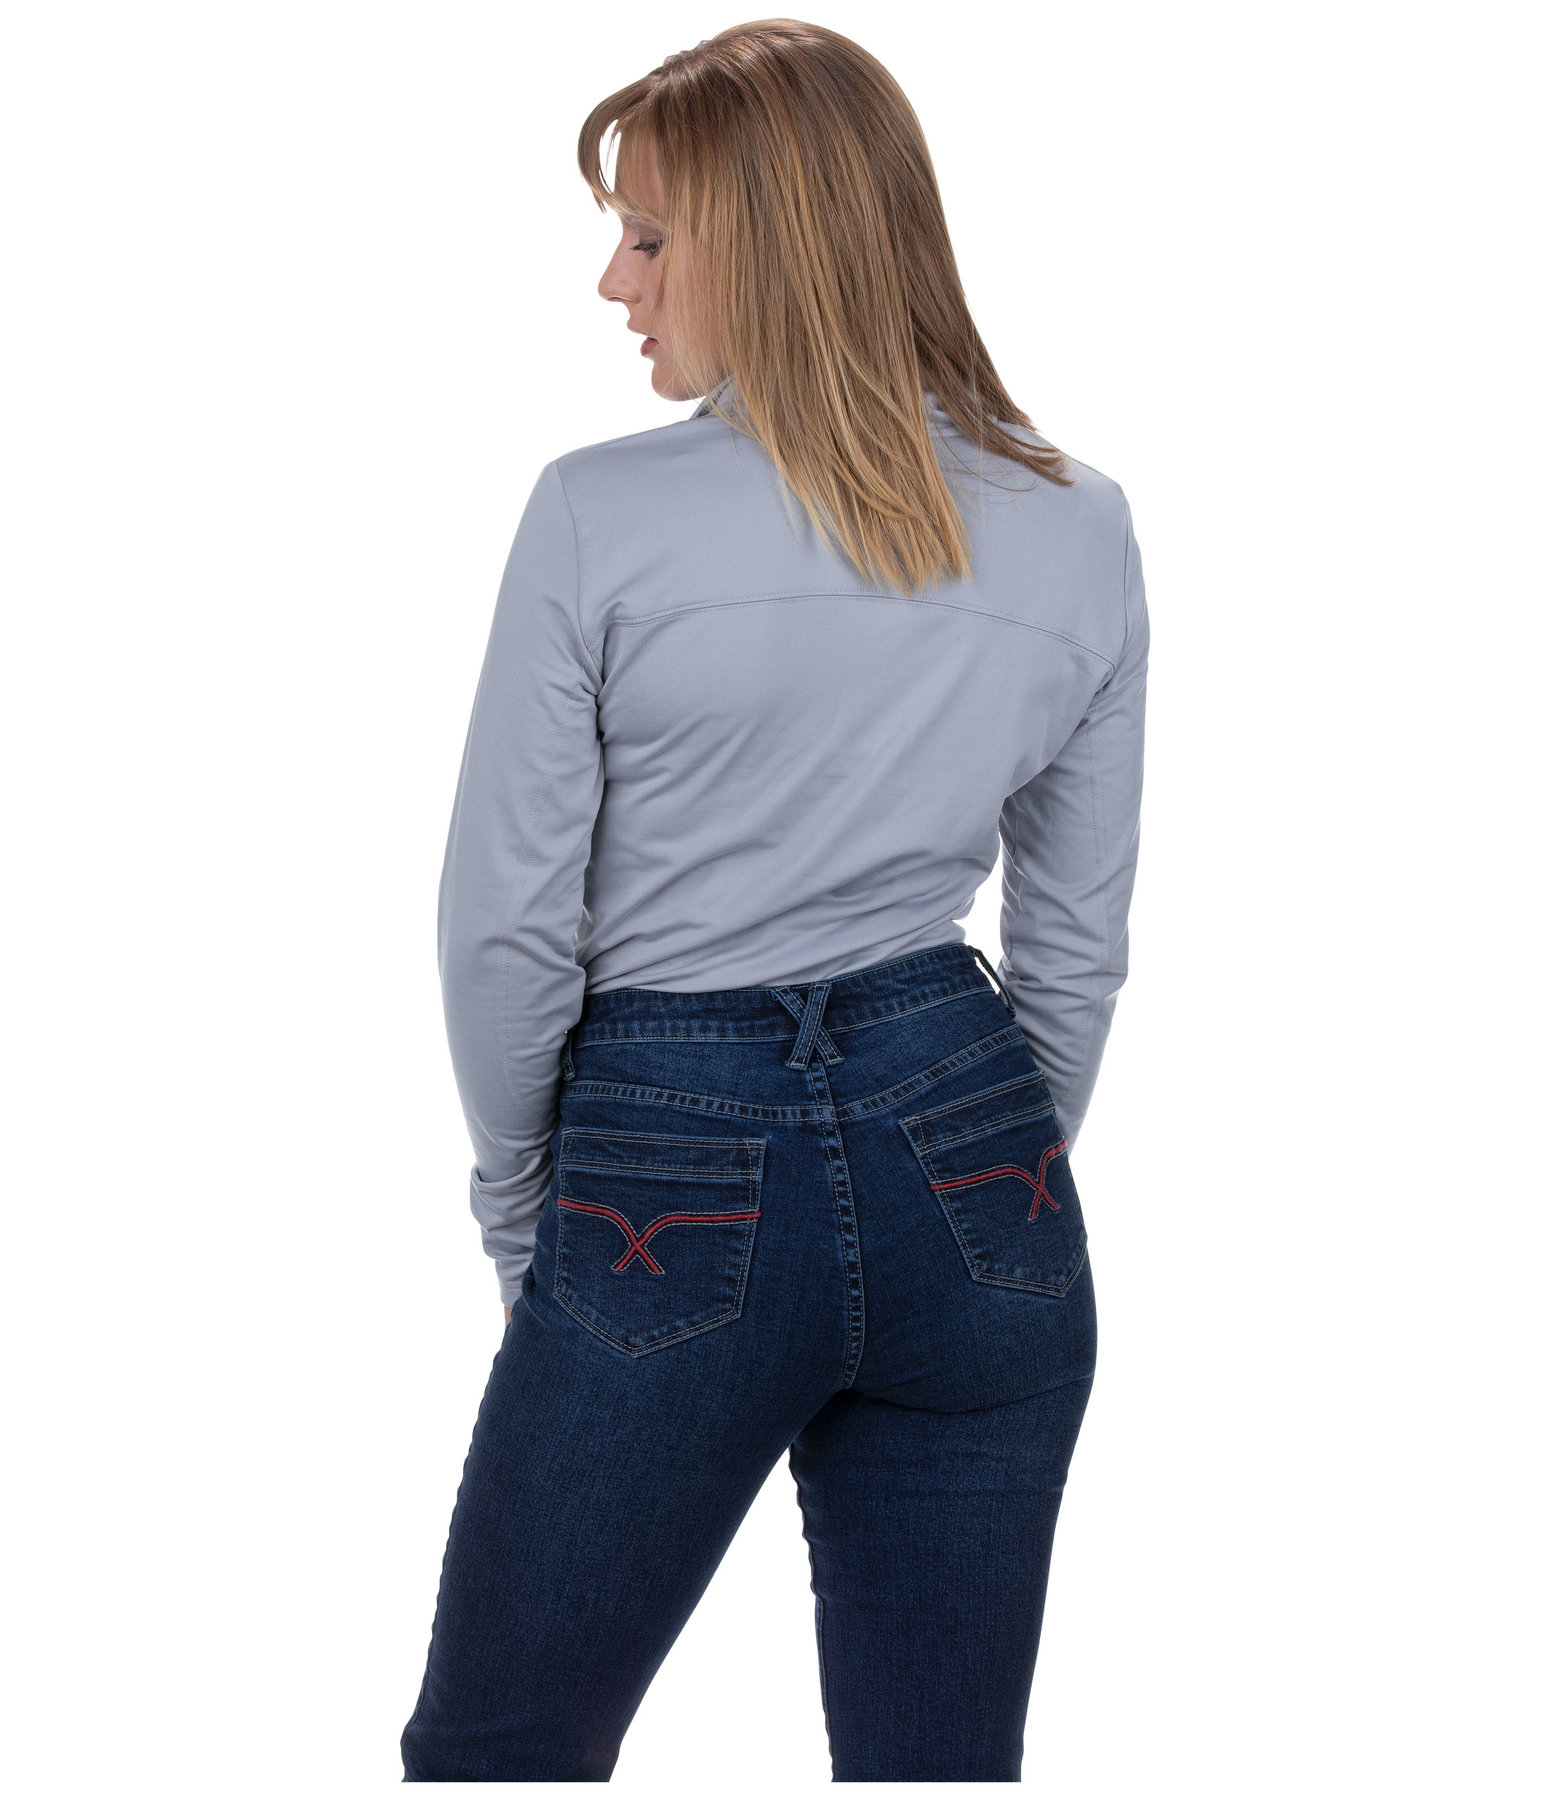 Western-Reitjeans Mary